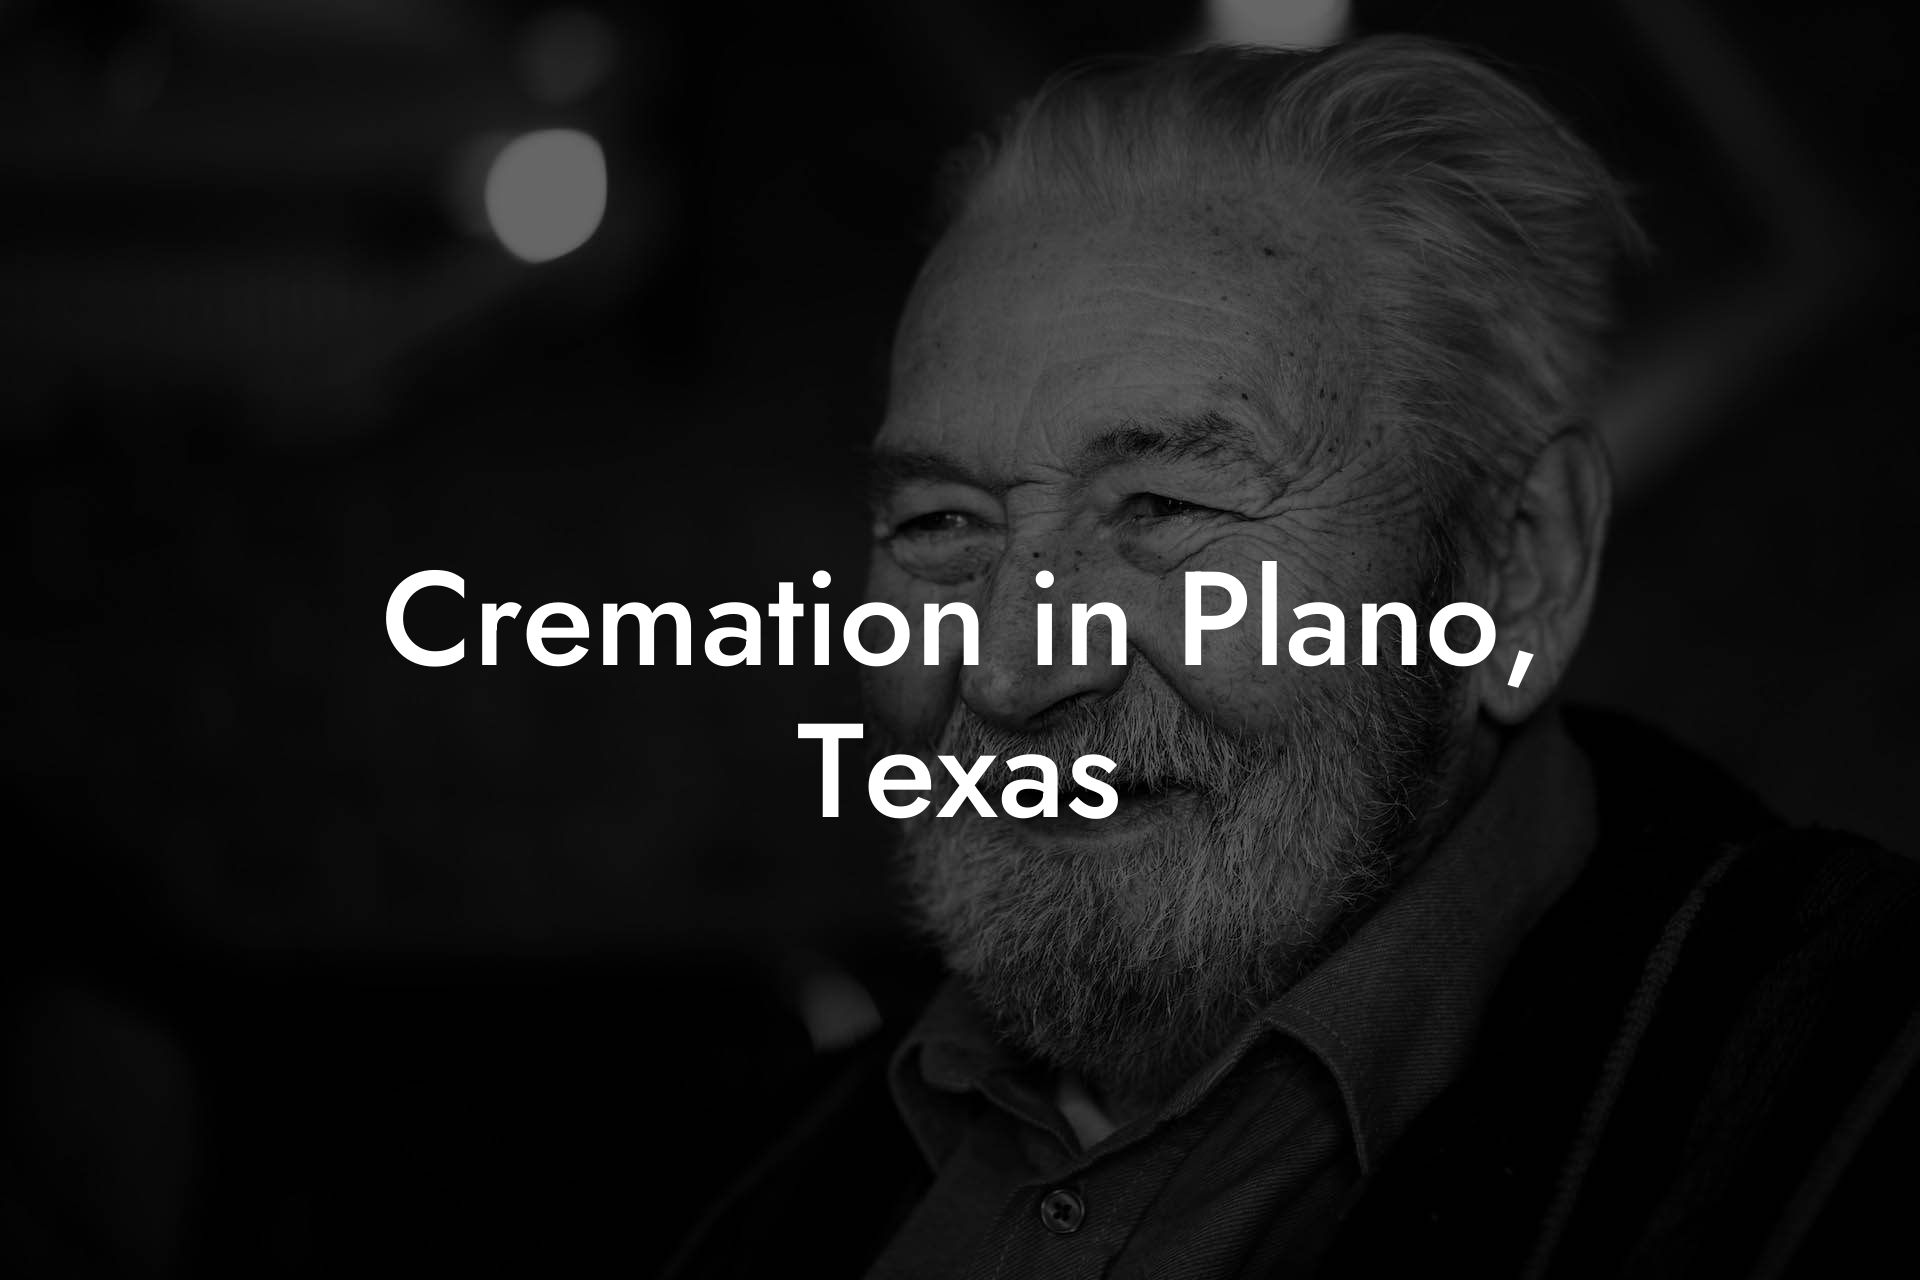 Cremation in Plano, Texas